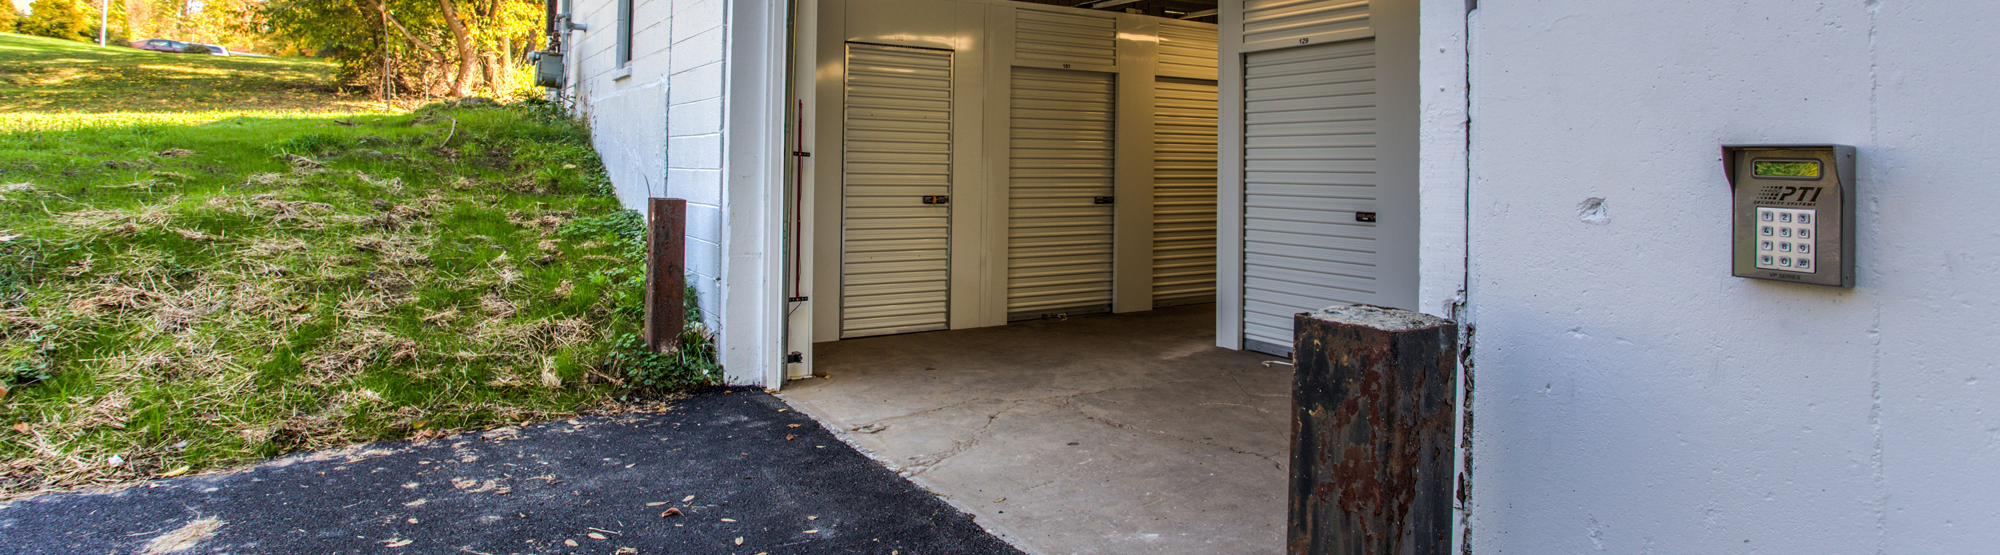 Interior of units at Storage First